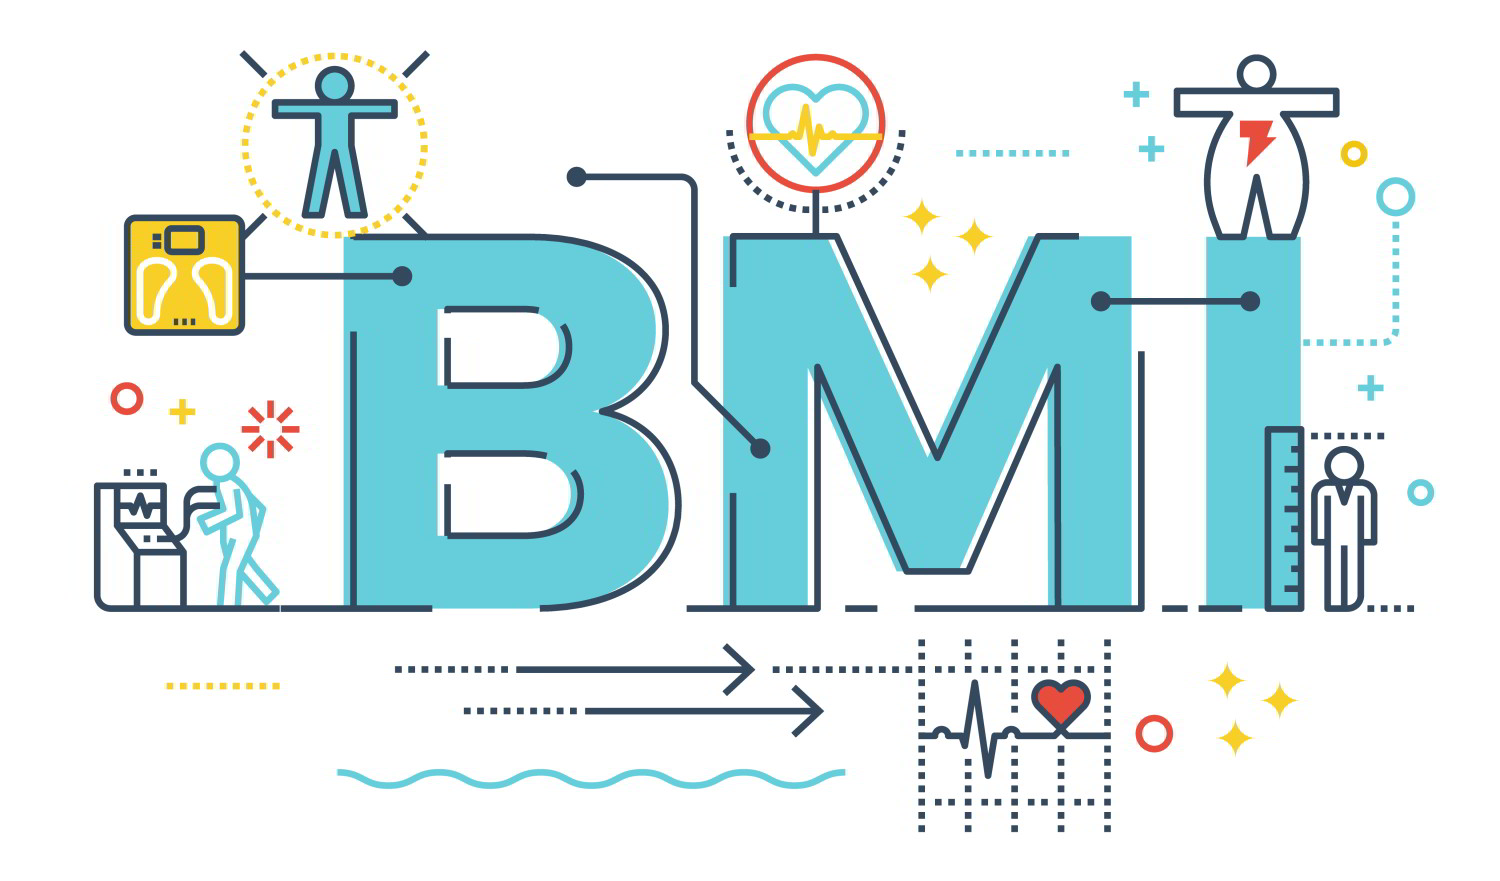 What You Need To Know About BMI